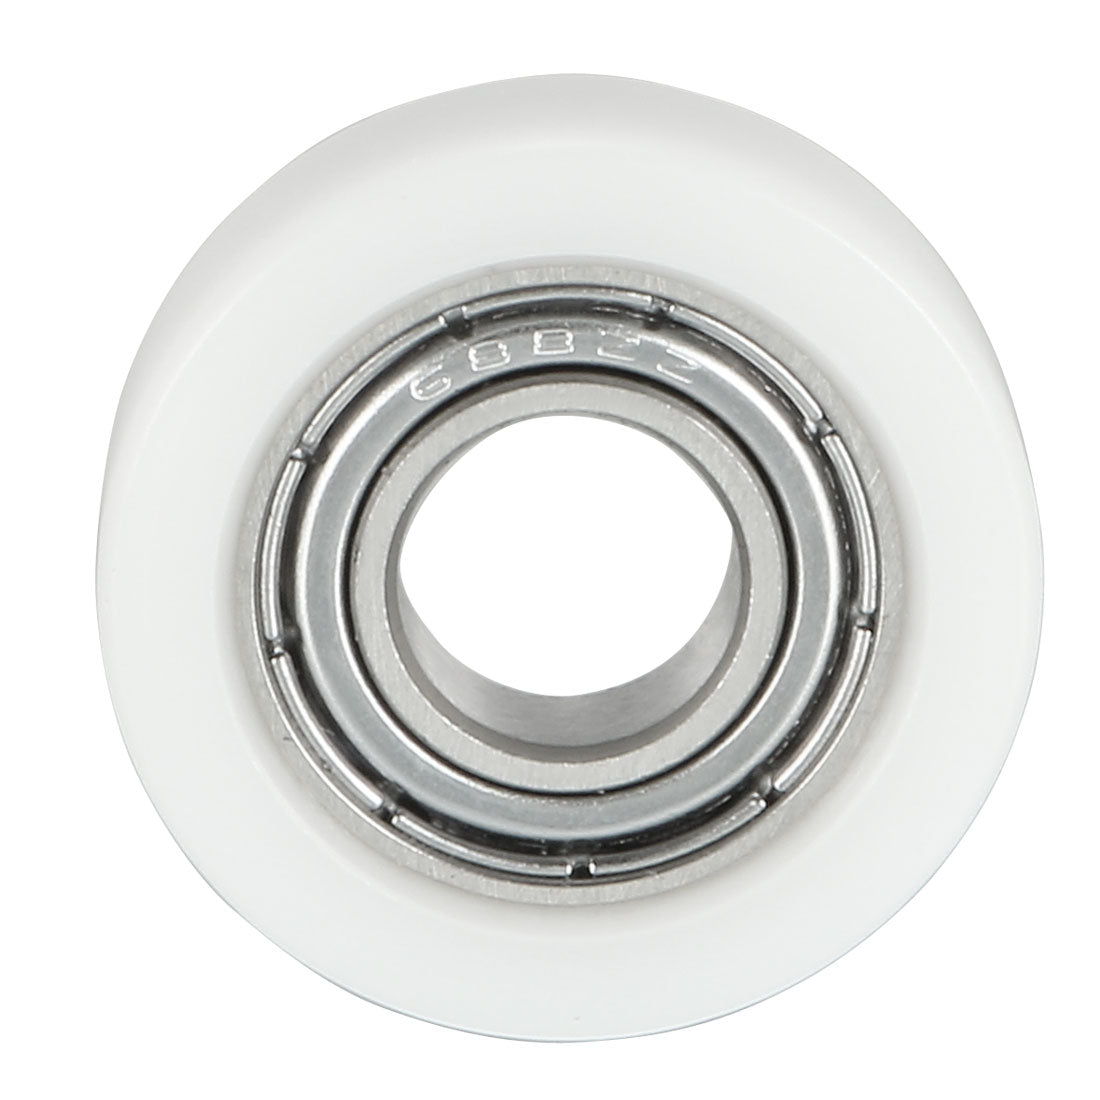 uxcell Uxcell 4pcs 8x22x7mm Roller Idler Bearing Pulley Sliding Conveyor Wheel White